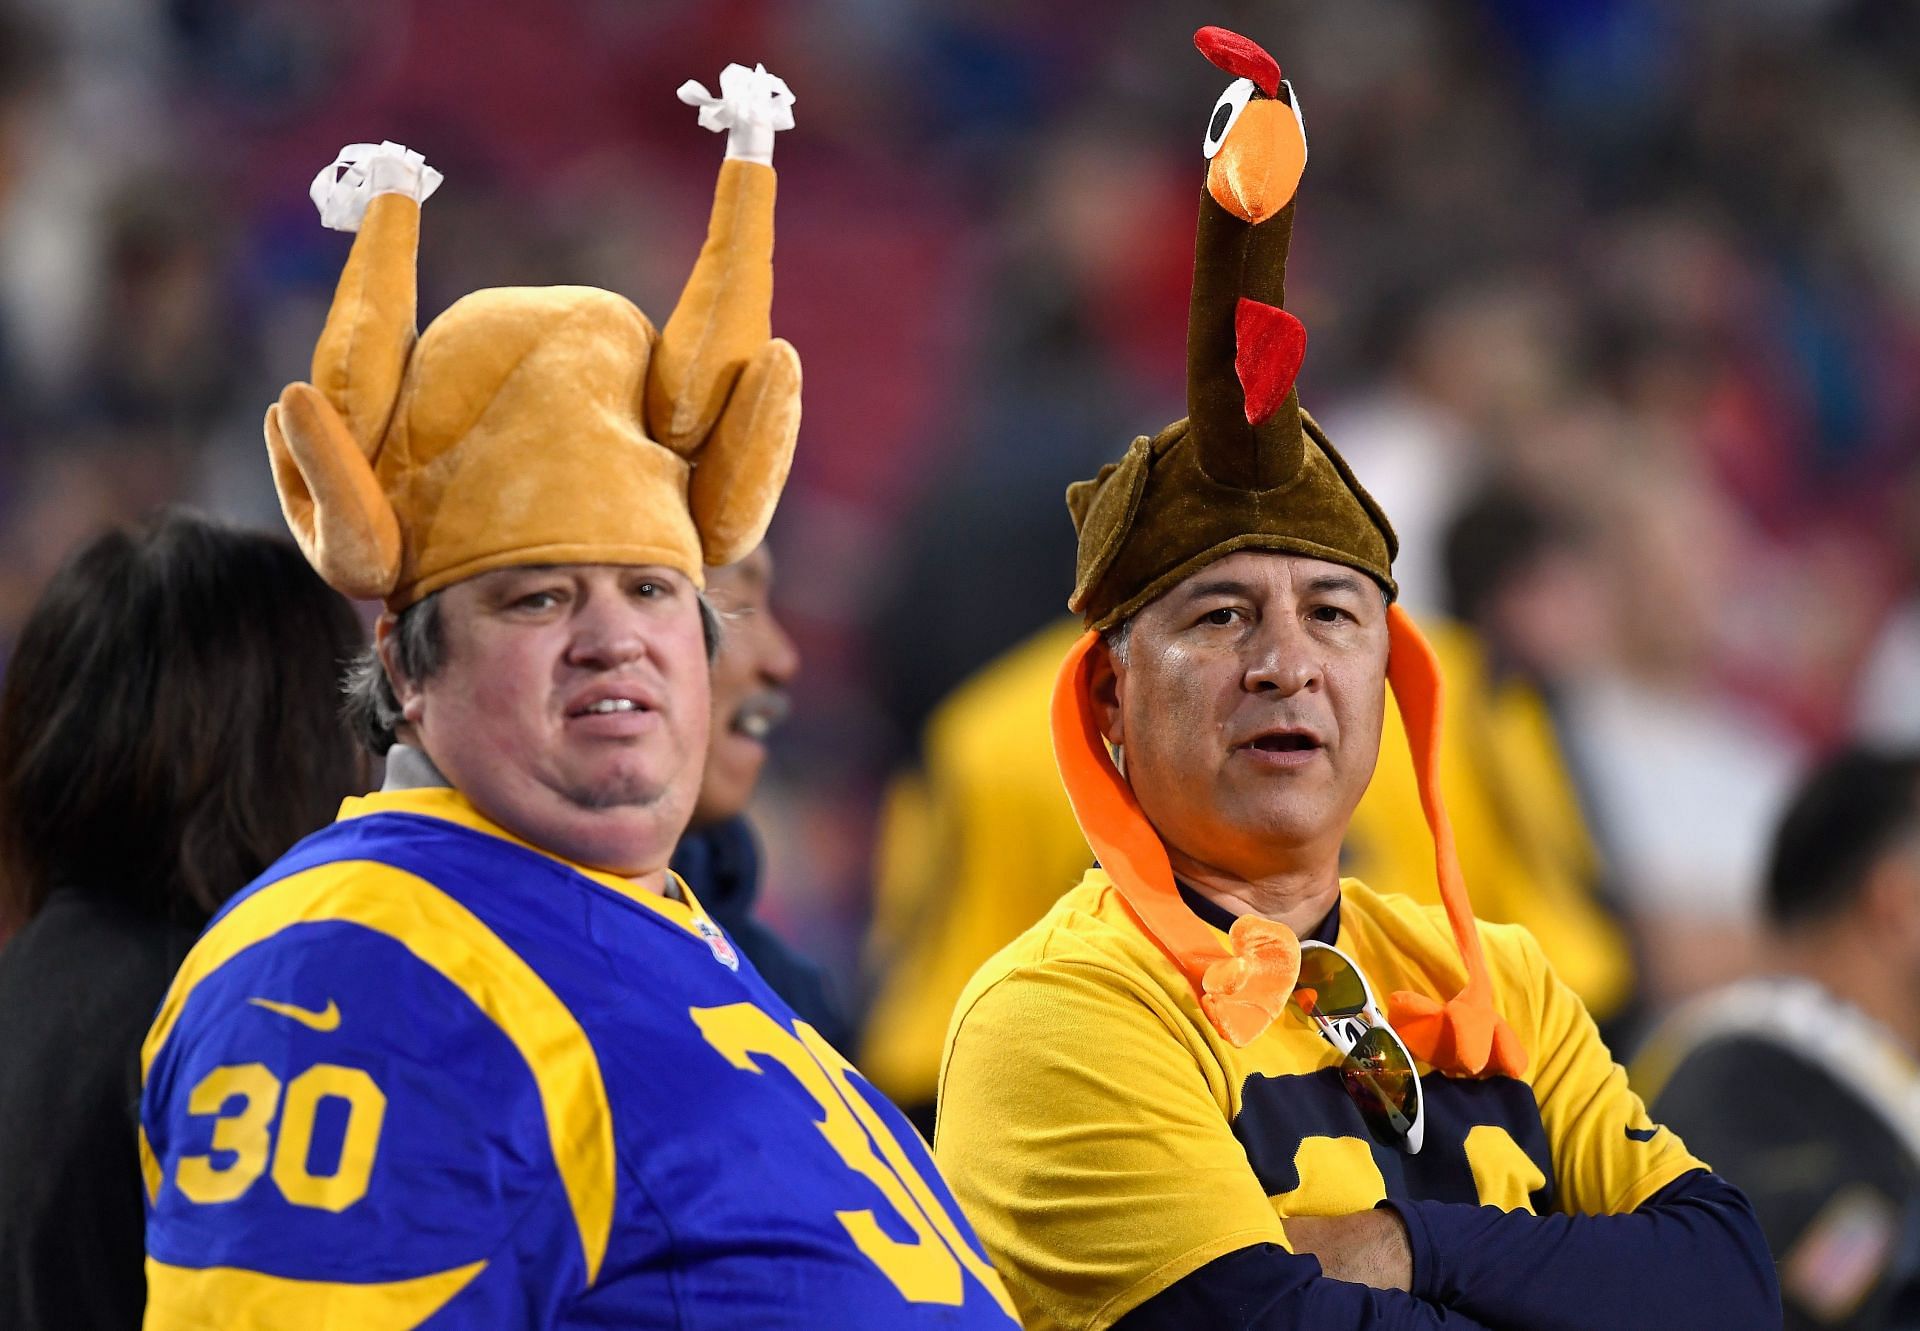 Los Angeles Rams fans commemorating the Thanksgiving holiday in 2018 (Photo: Getty)